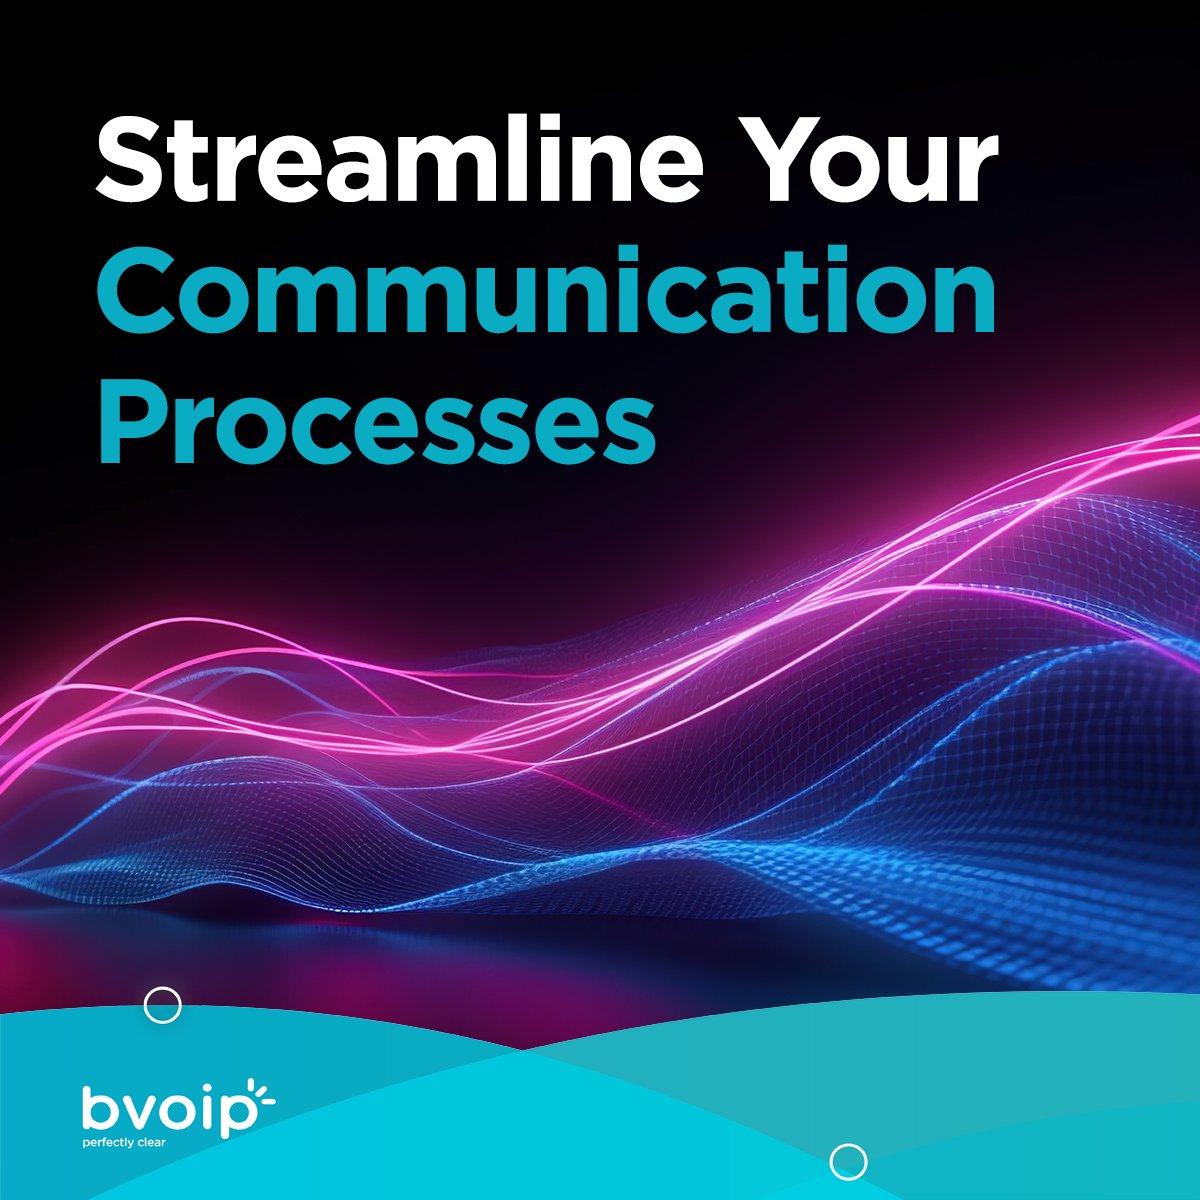 Want to streamline your communication processes? bvoip's VoIP service comes with over 200 integrations, including ConnectWise, Autotask, and ITglue. bit.ly/3BD55Xf
#bvoip #Integrations #connectwise #autotask #VoIP #Collaboration #MSTeamsIntegration